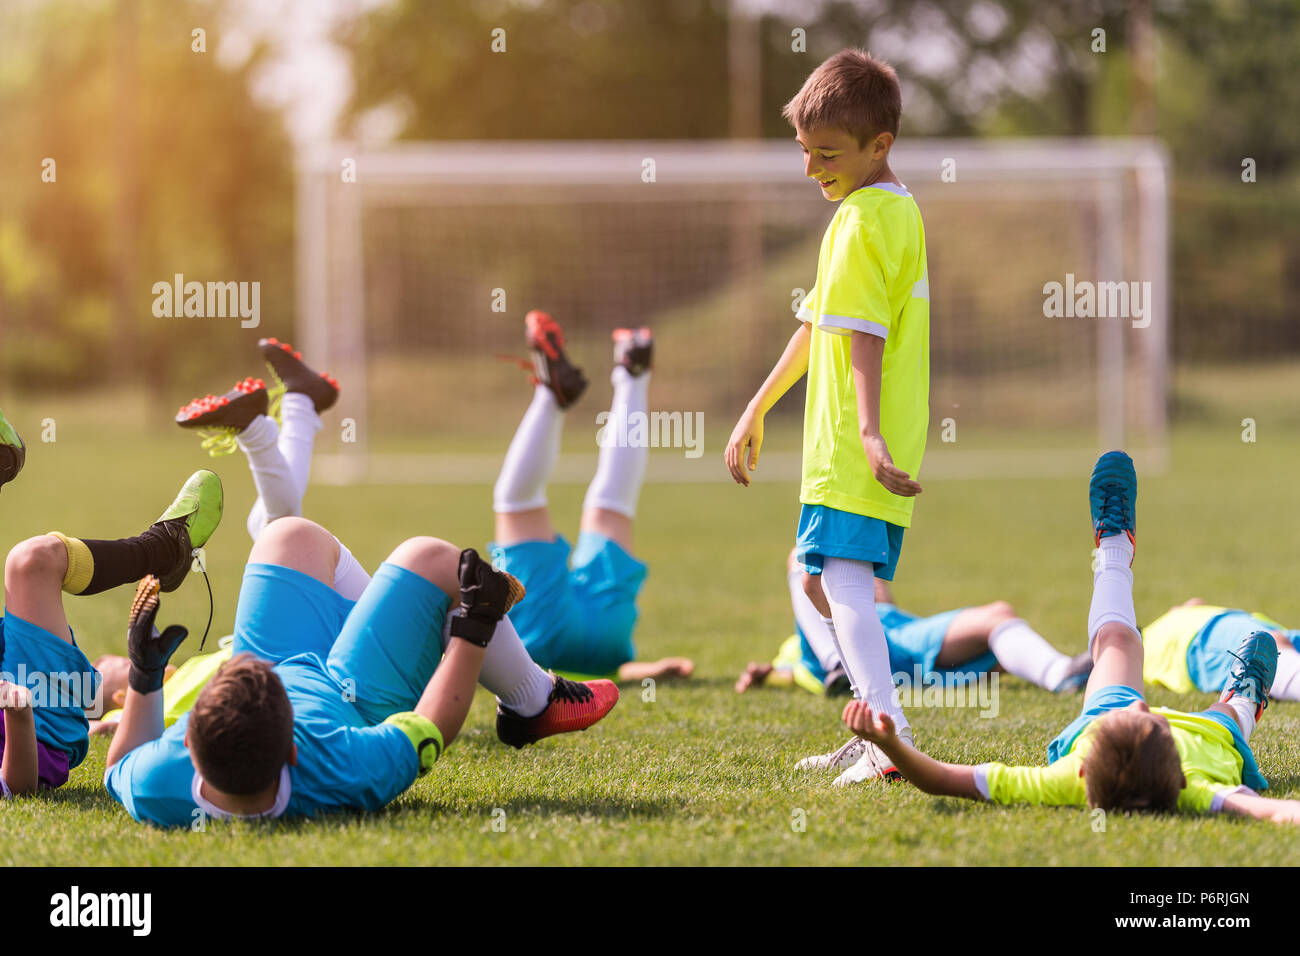 Kids soccer football - young children players celebrating after victory Stock Photo